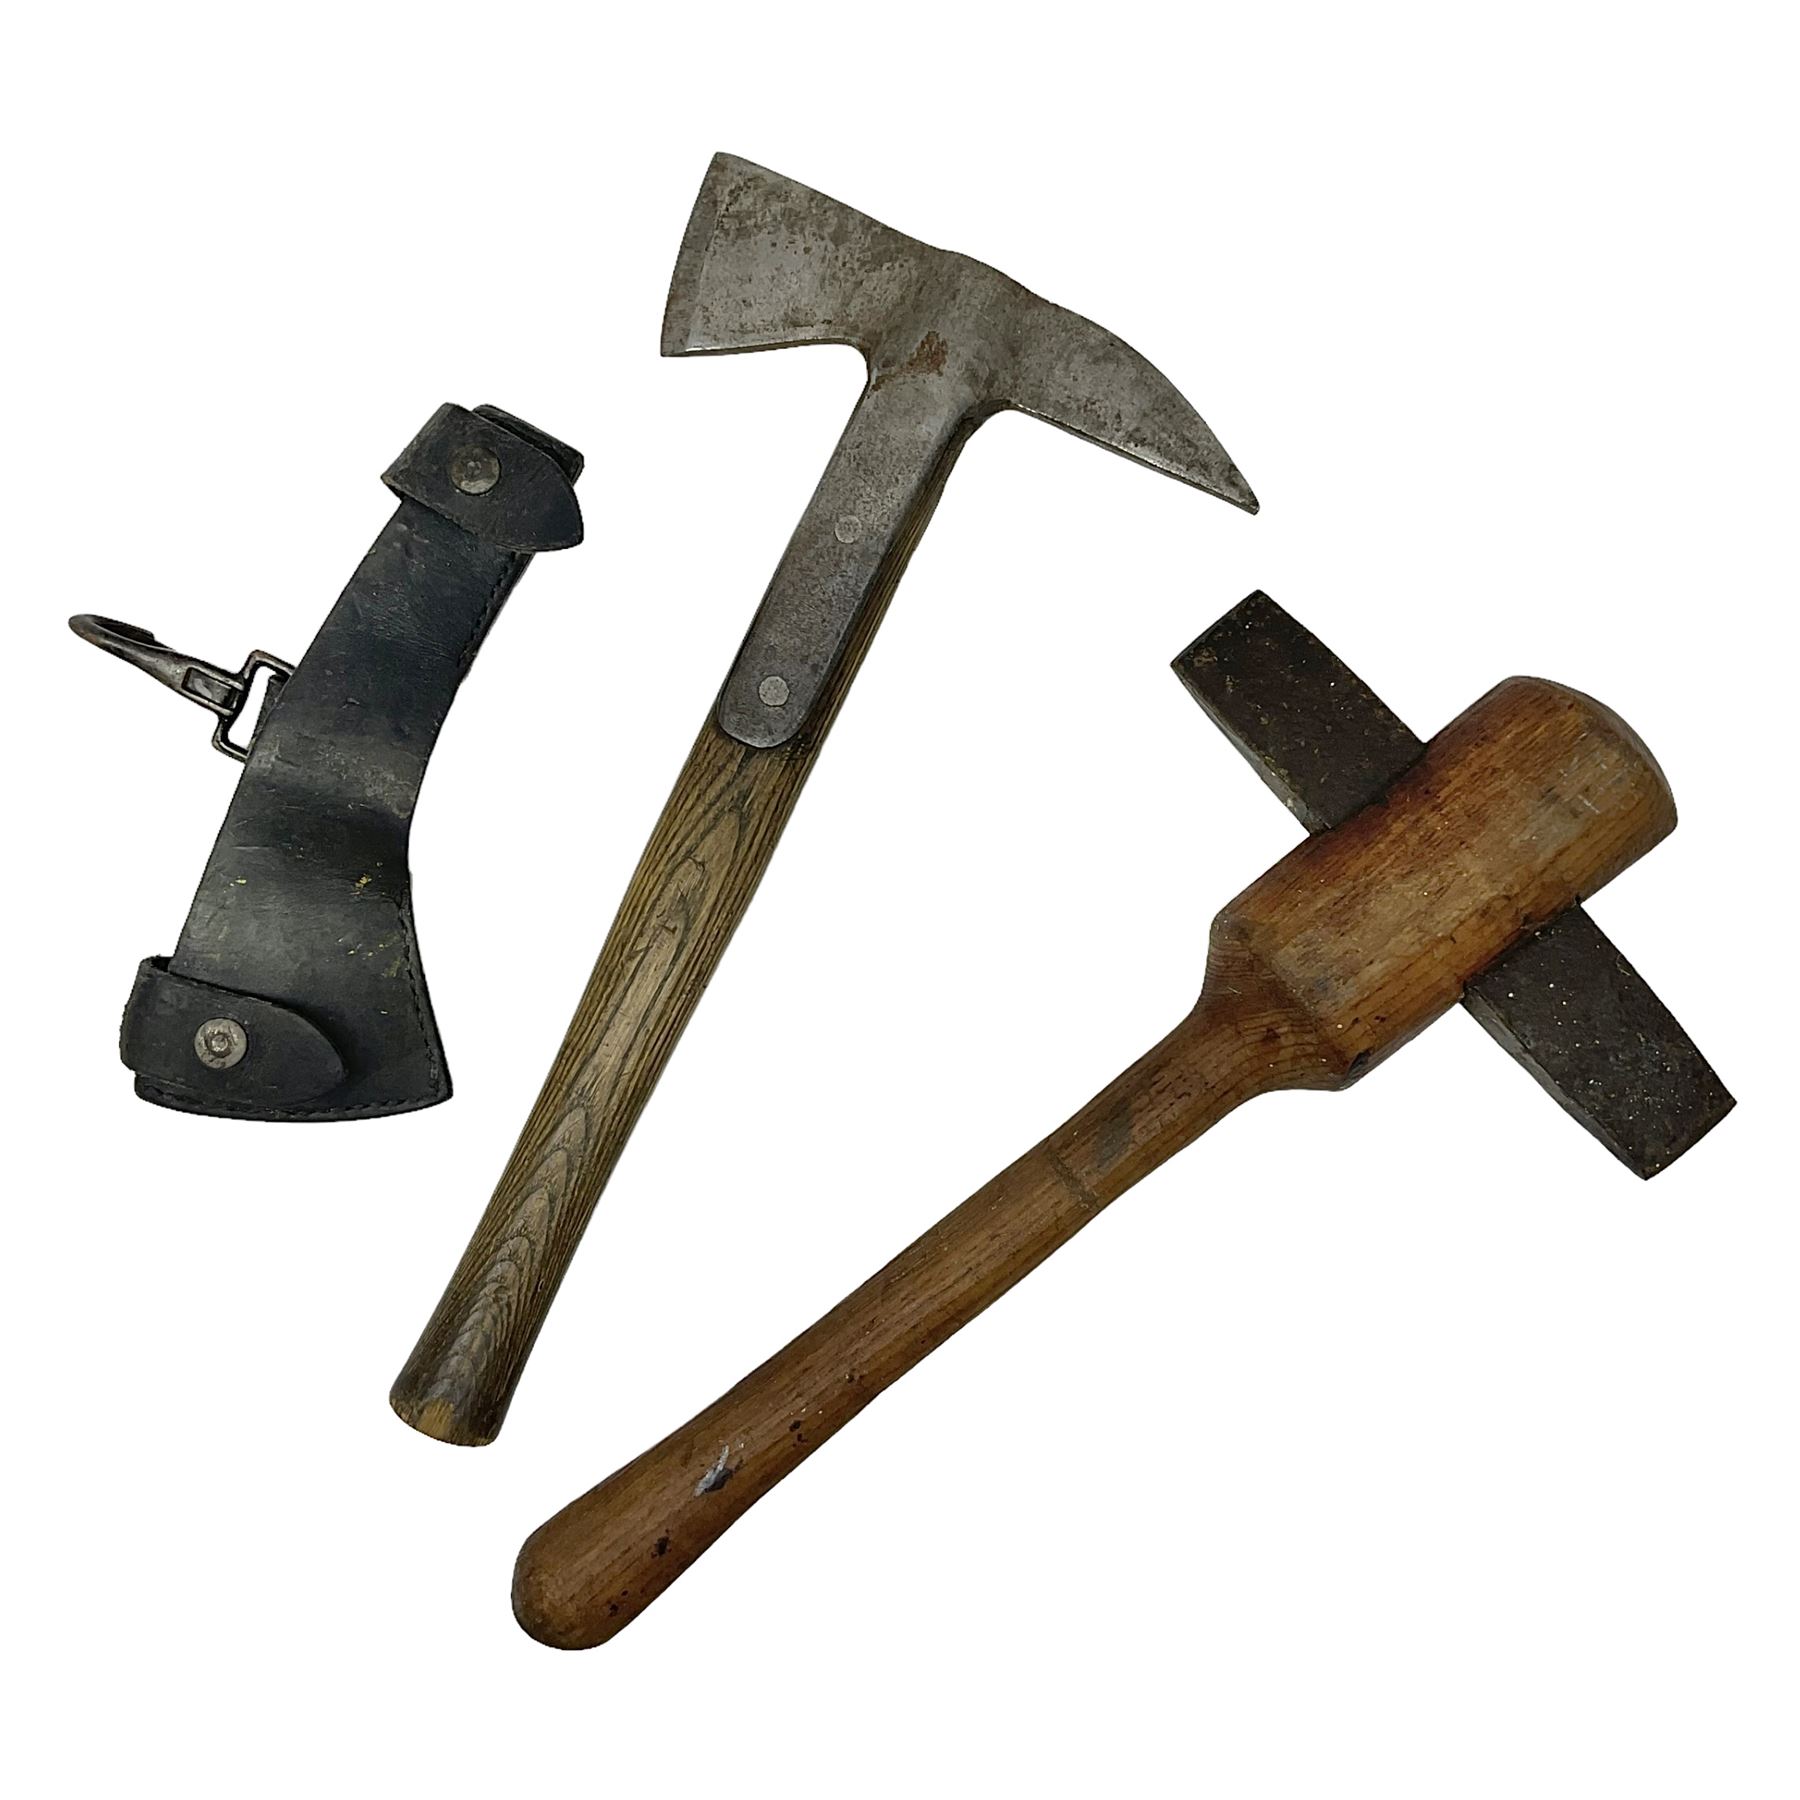 Post-War military type fireman's axe impressed 'PERKS 1953/54' with additional indistinct mark proba